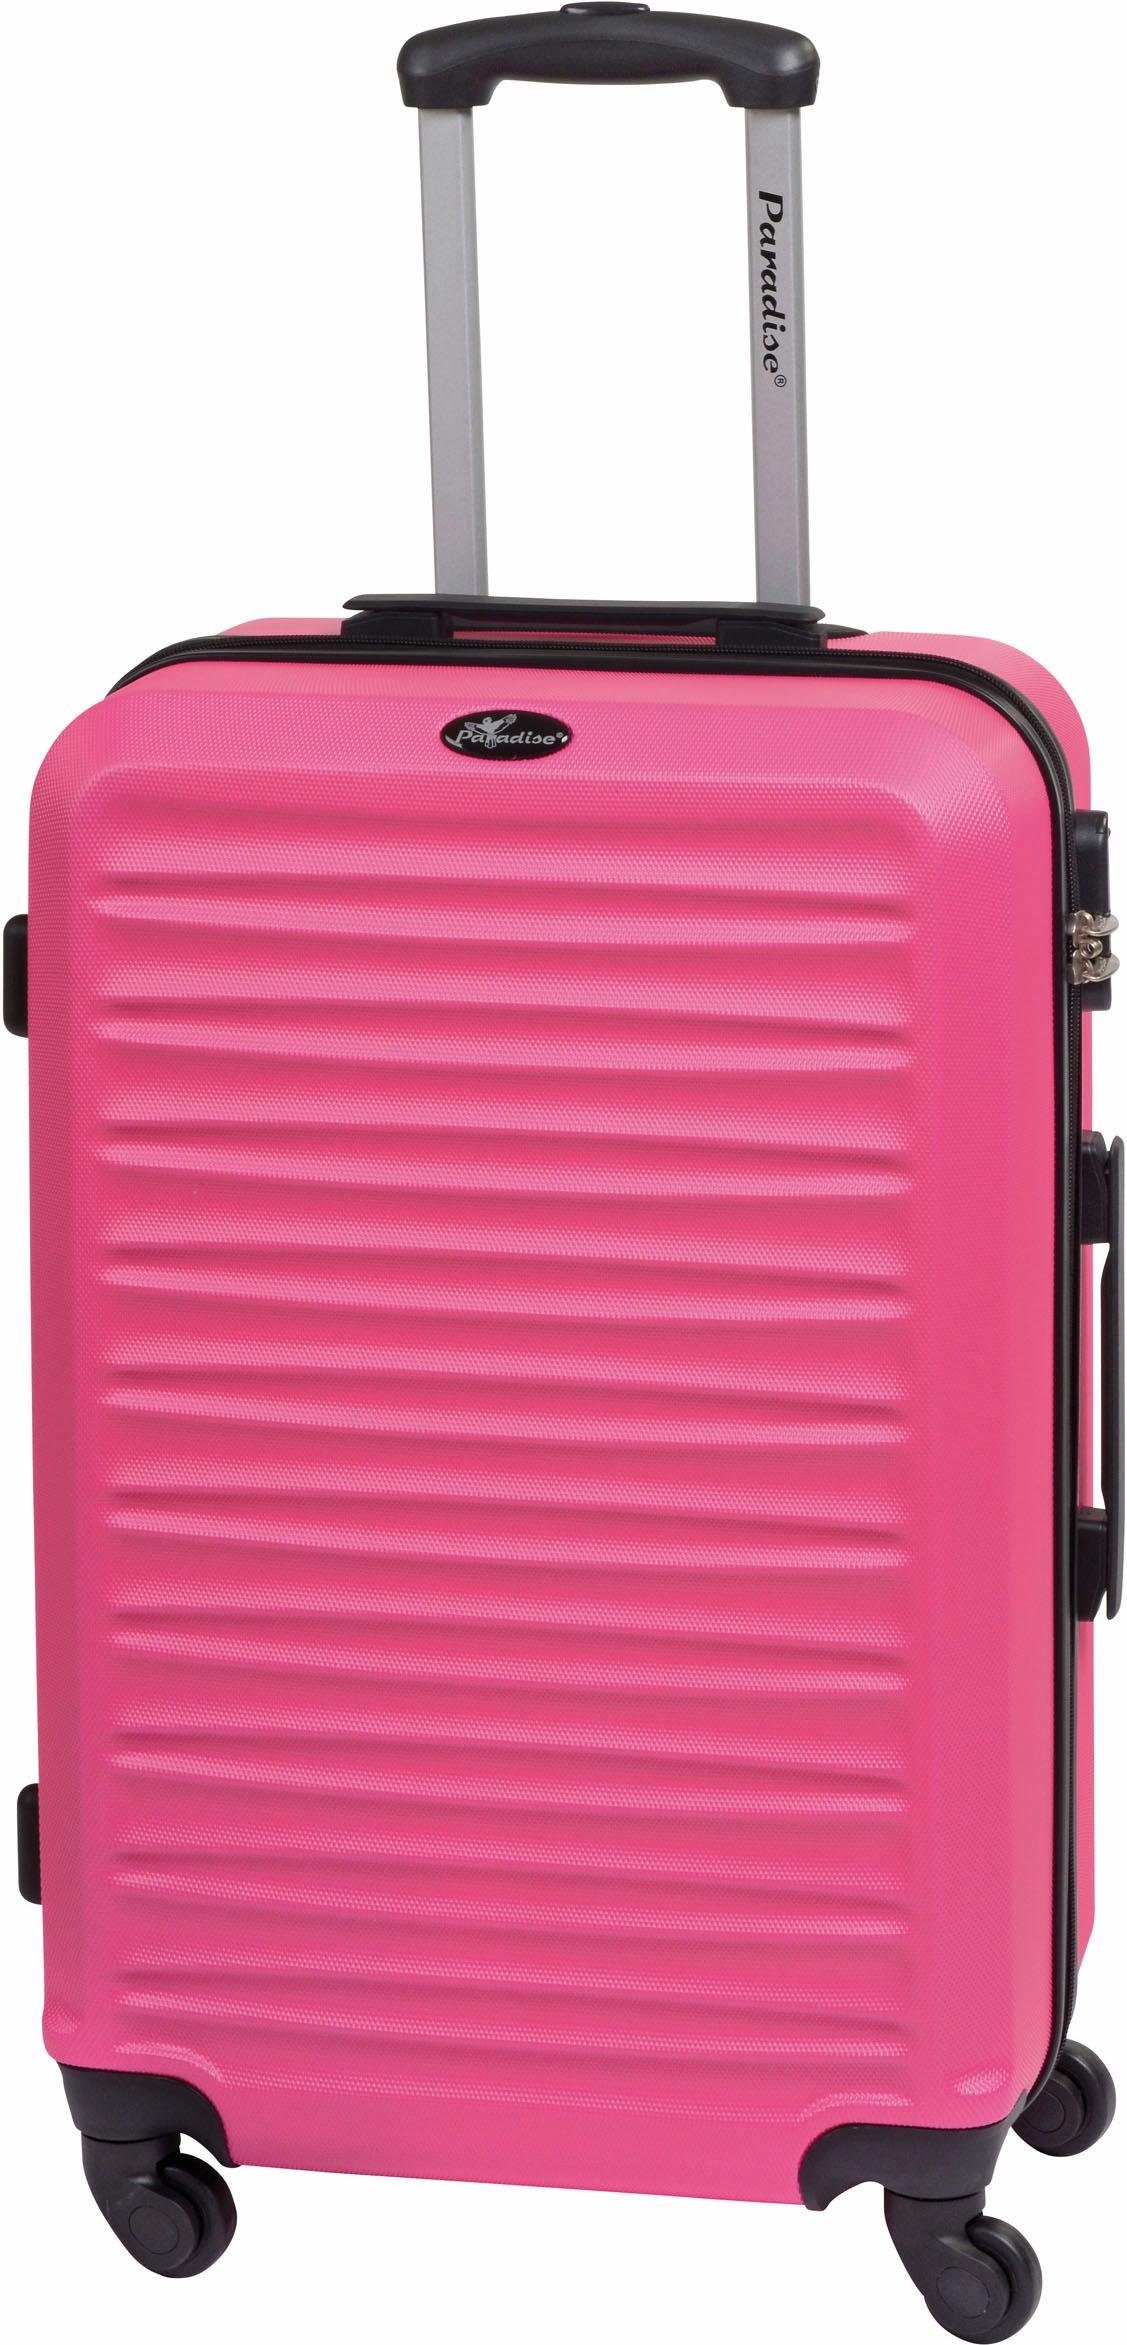 Paradise by Rollen, Trolleyset 4 CHECK.IN pink (Set, 3 Havanna, tlg)